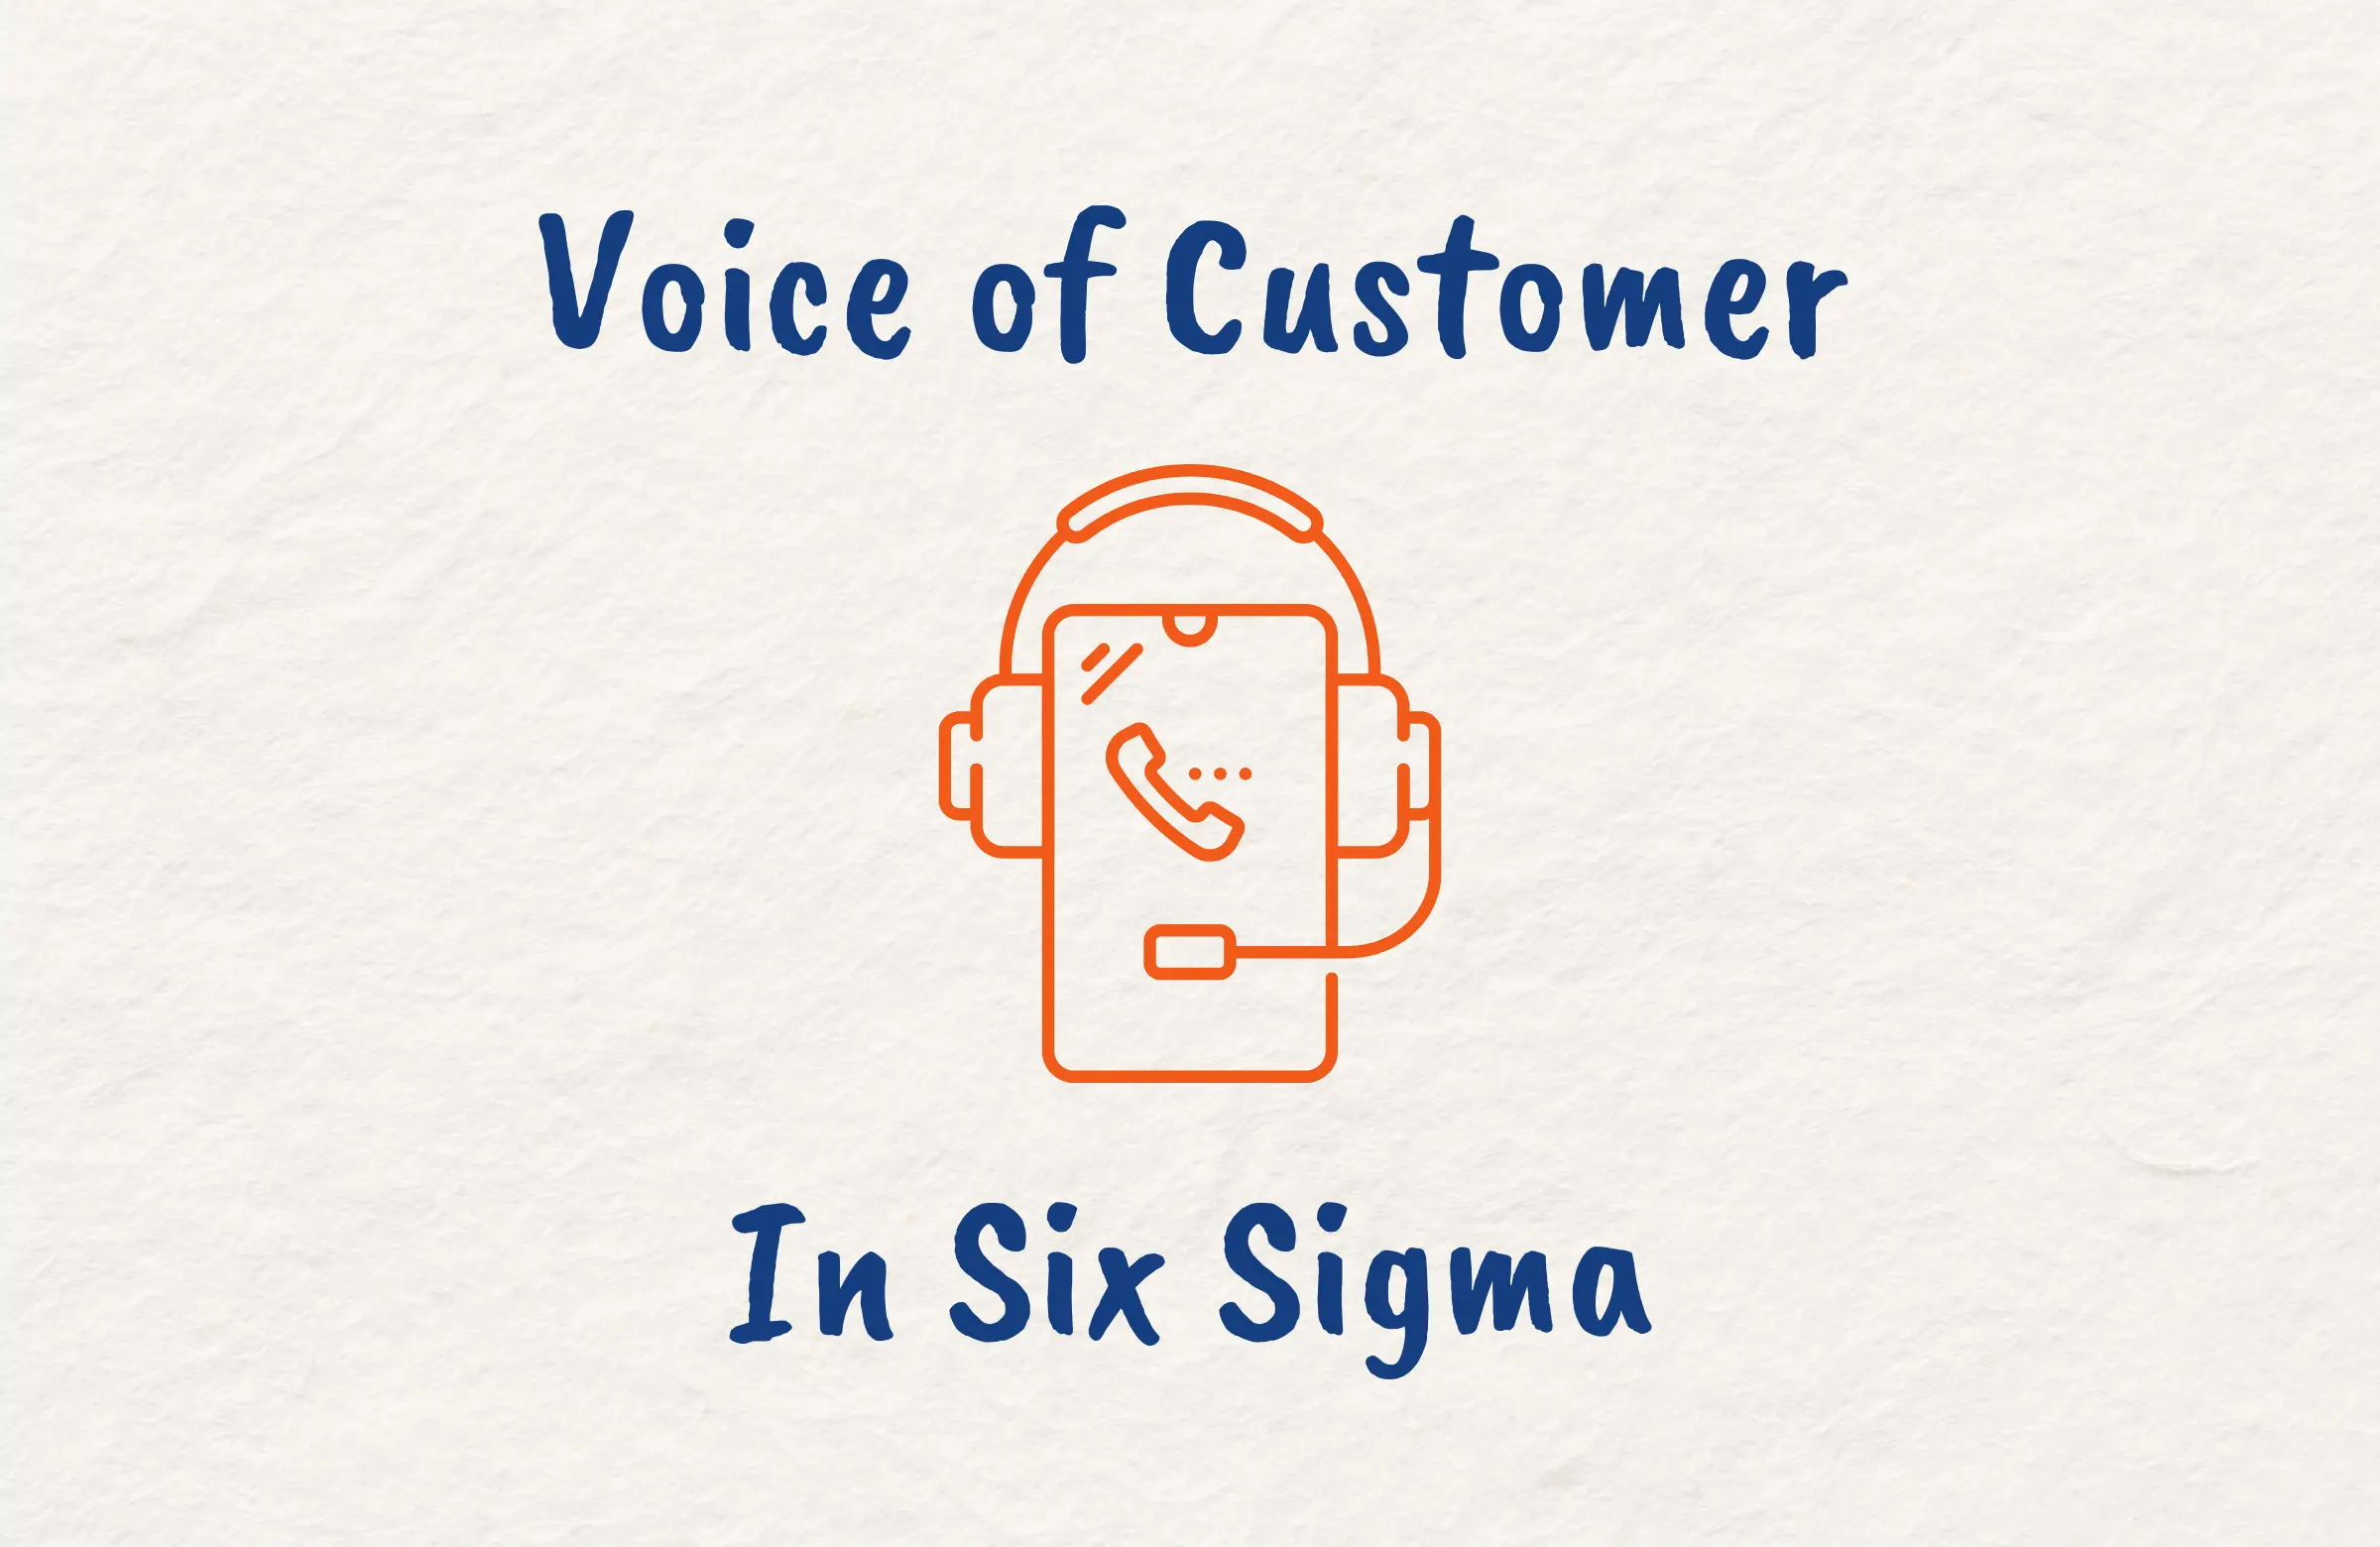 What is VoC in Six Sigma